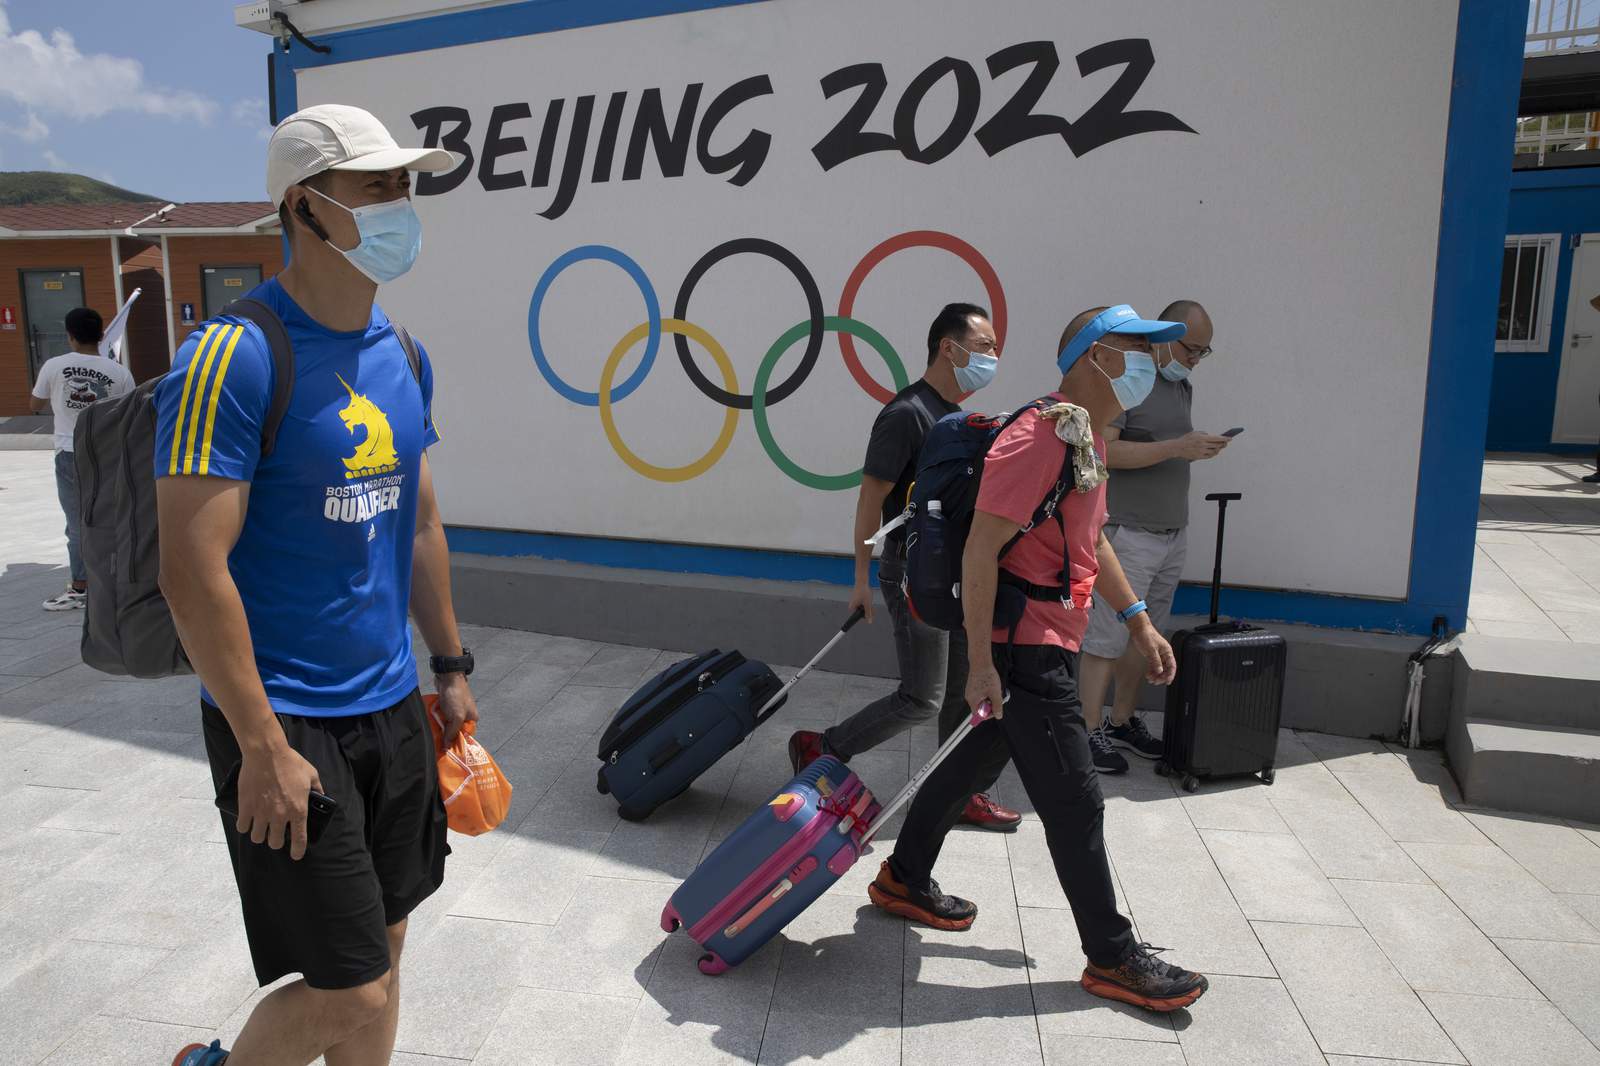 Human rights groups ask IOC to move Olympics from China